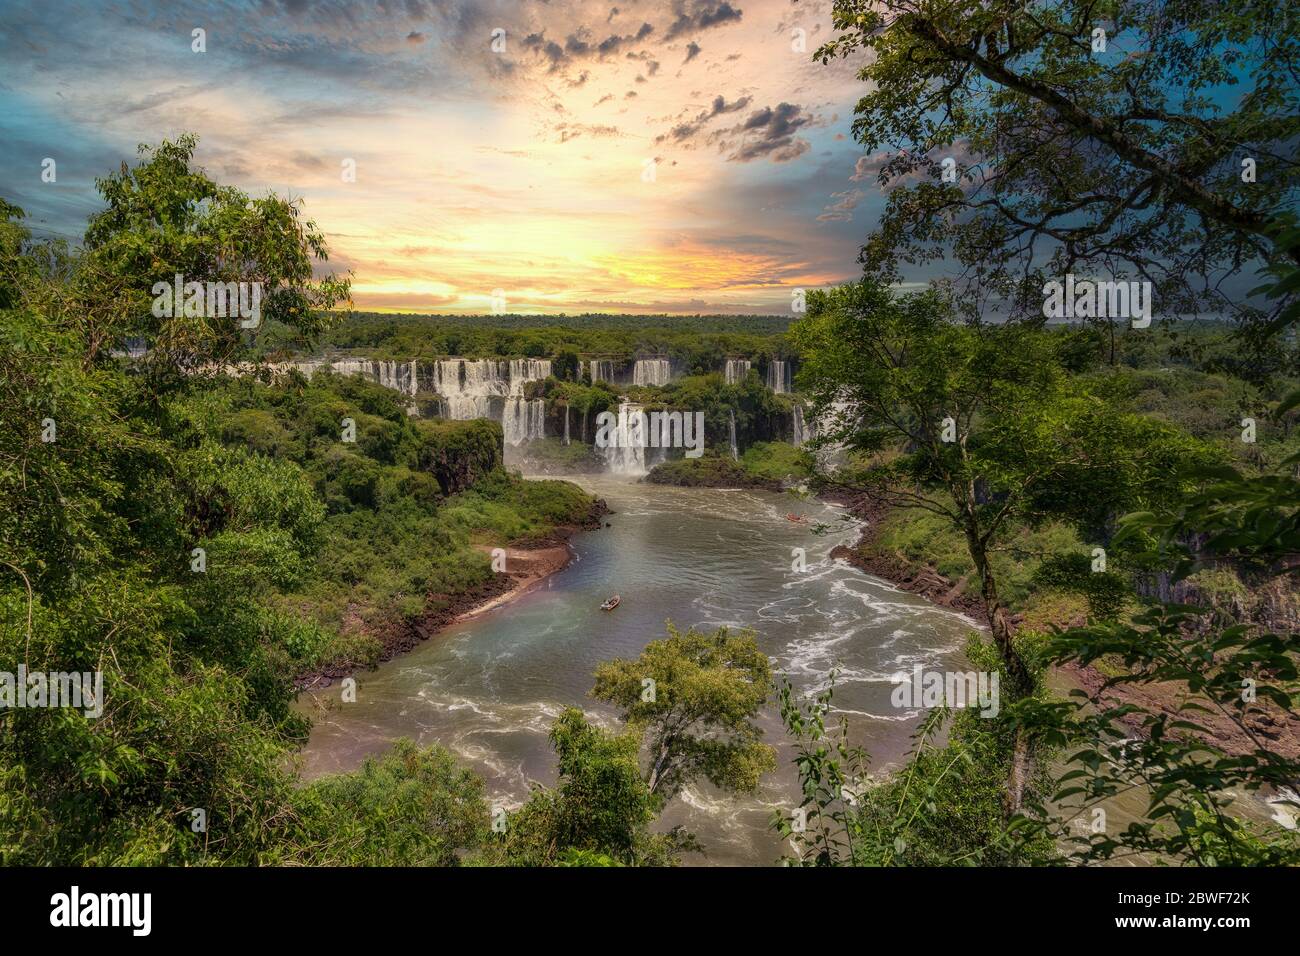 The Iguazu Falls on the Argentine side. Photographed from the Brazilian side. Stock Photo